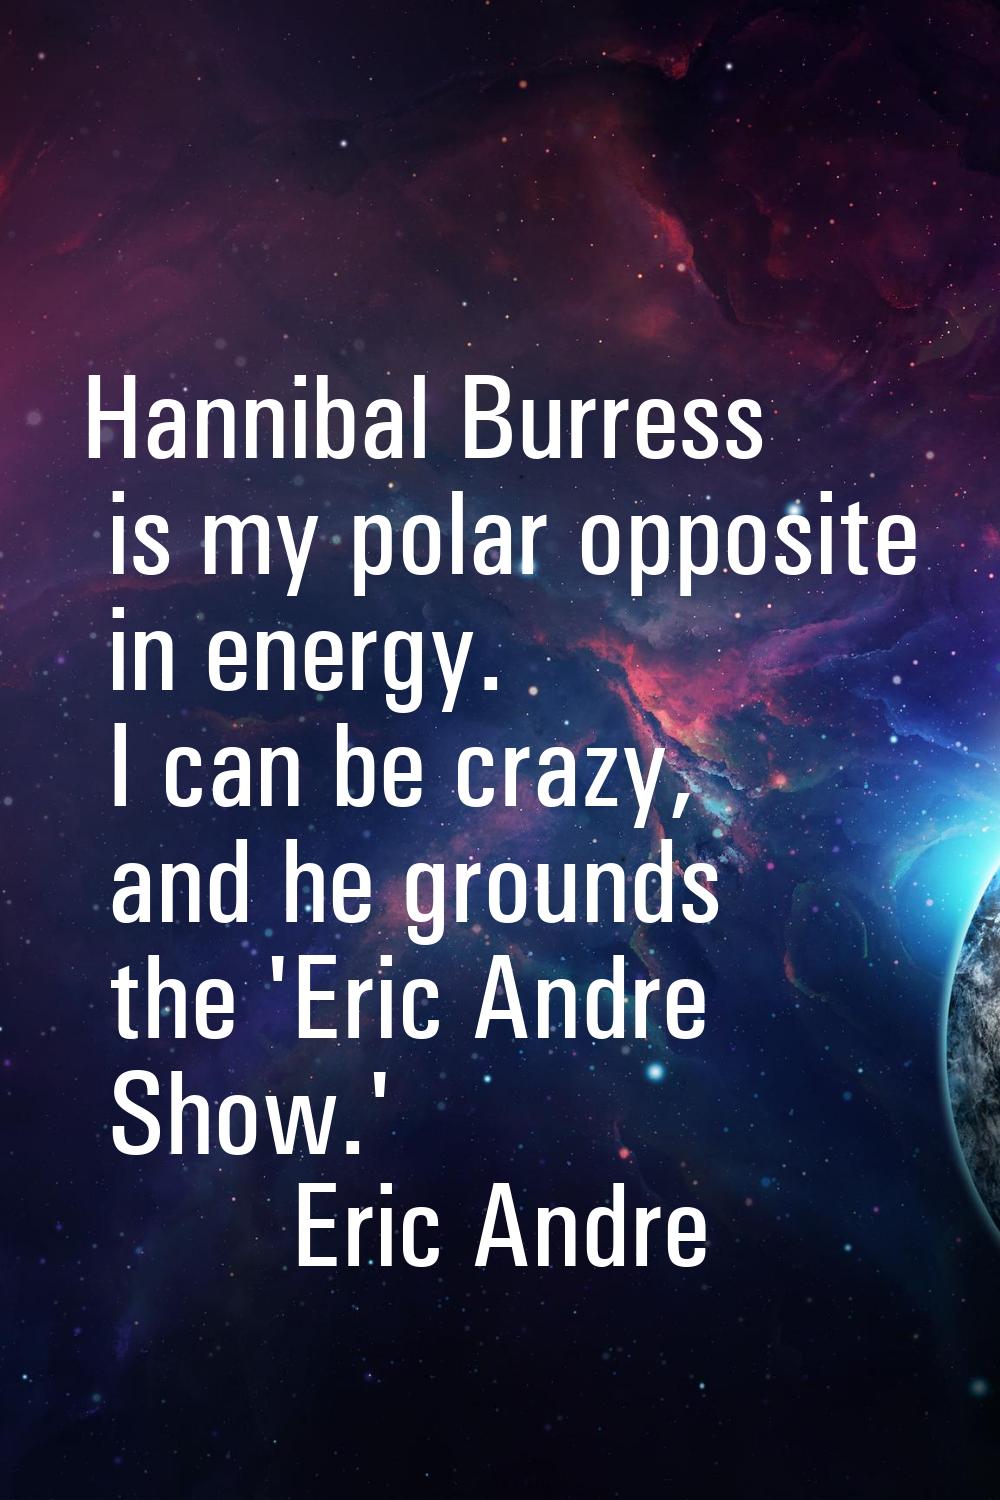 Hannibal Burress is my polar opposite in energy. I can be crazy, and he grounds the 'Eric Andre Sho